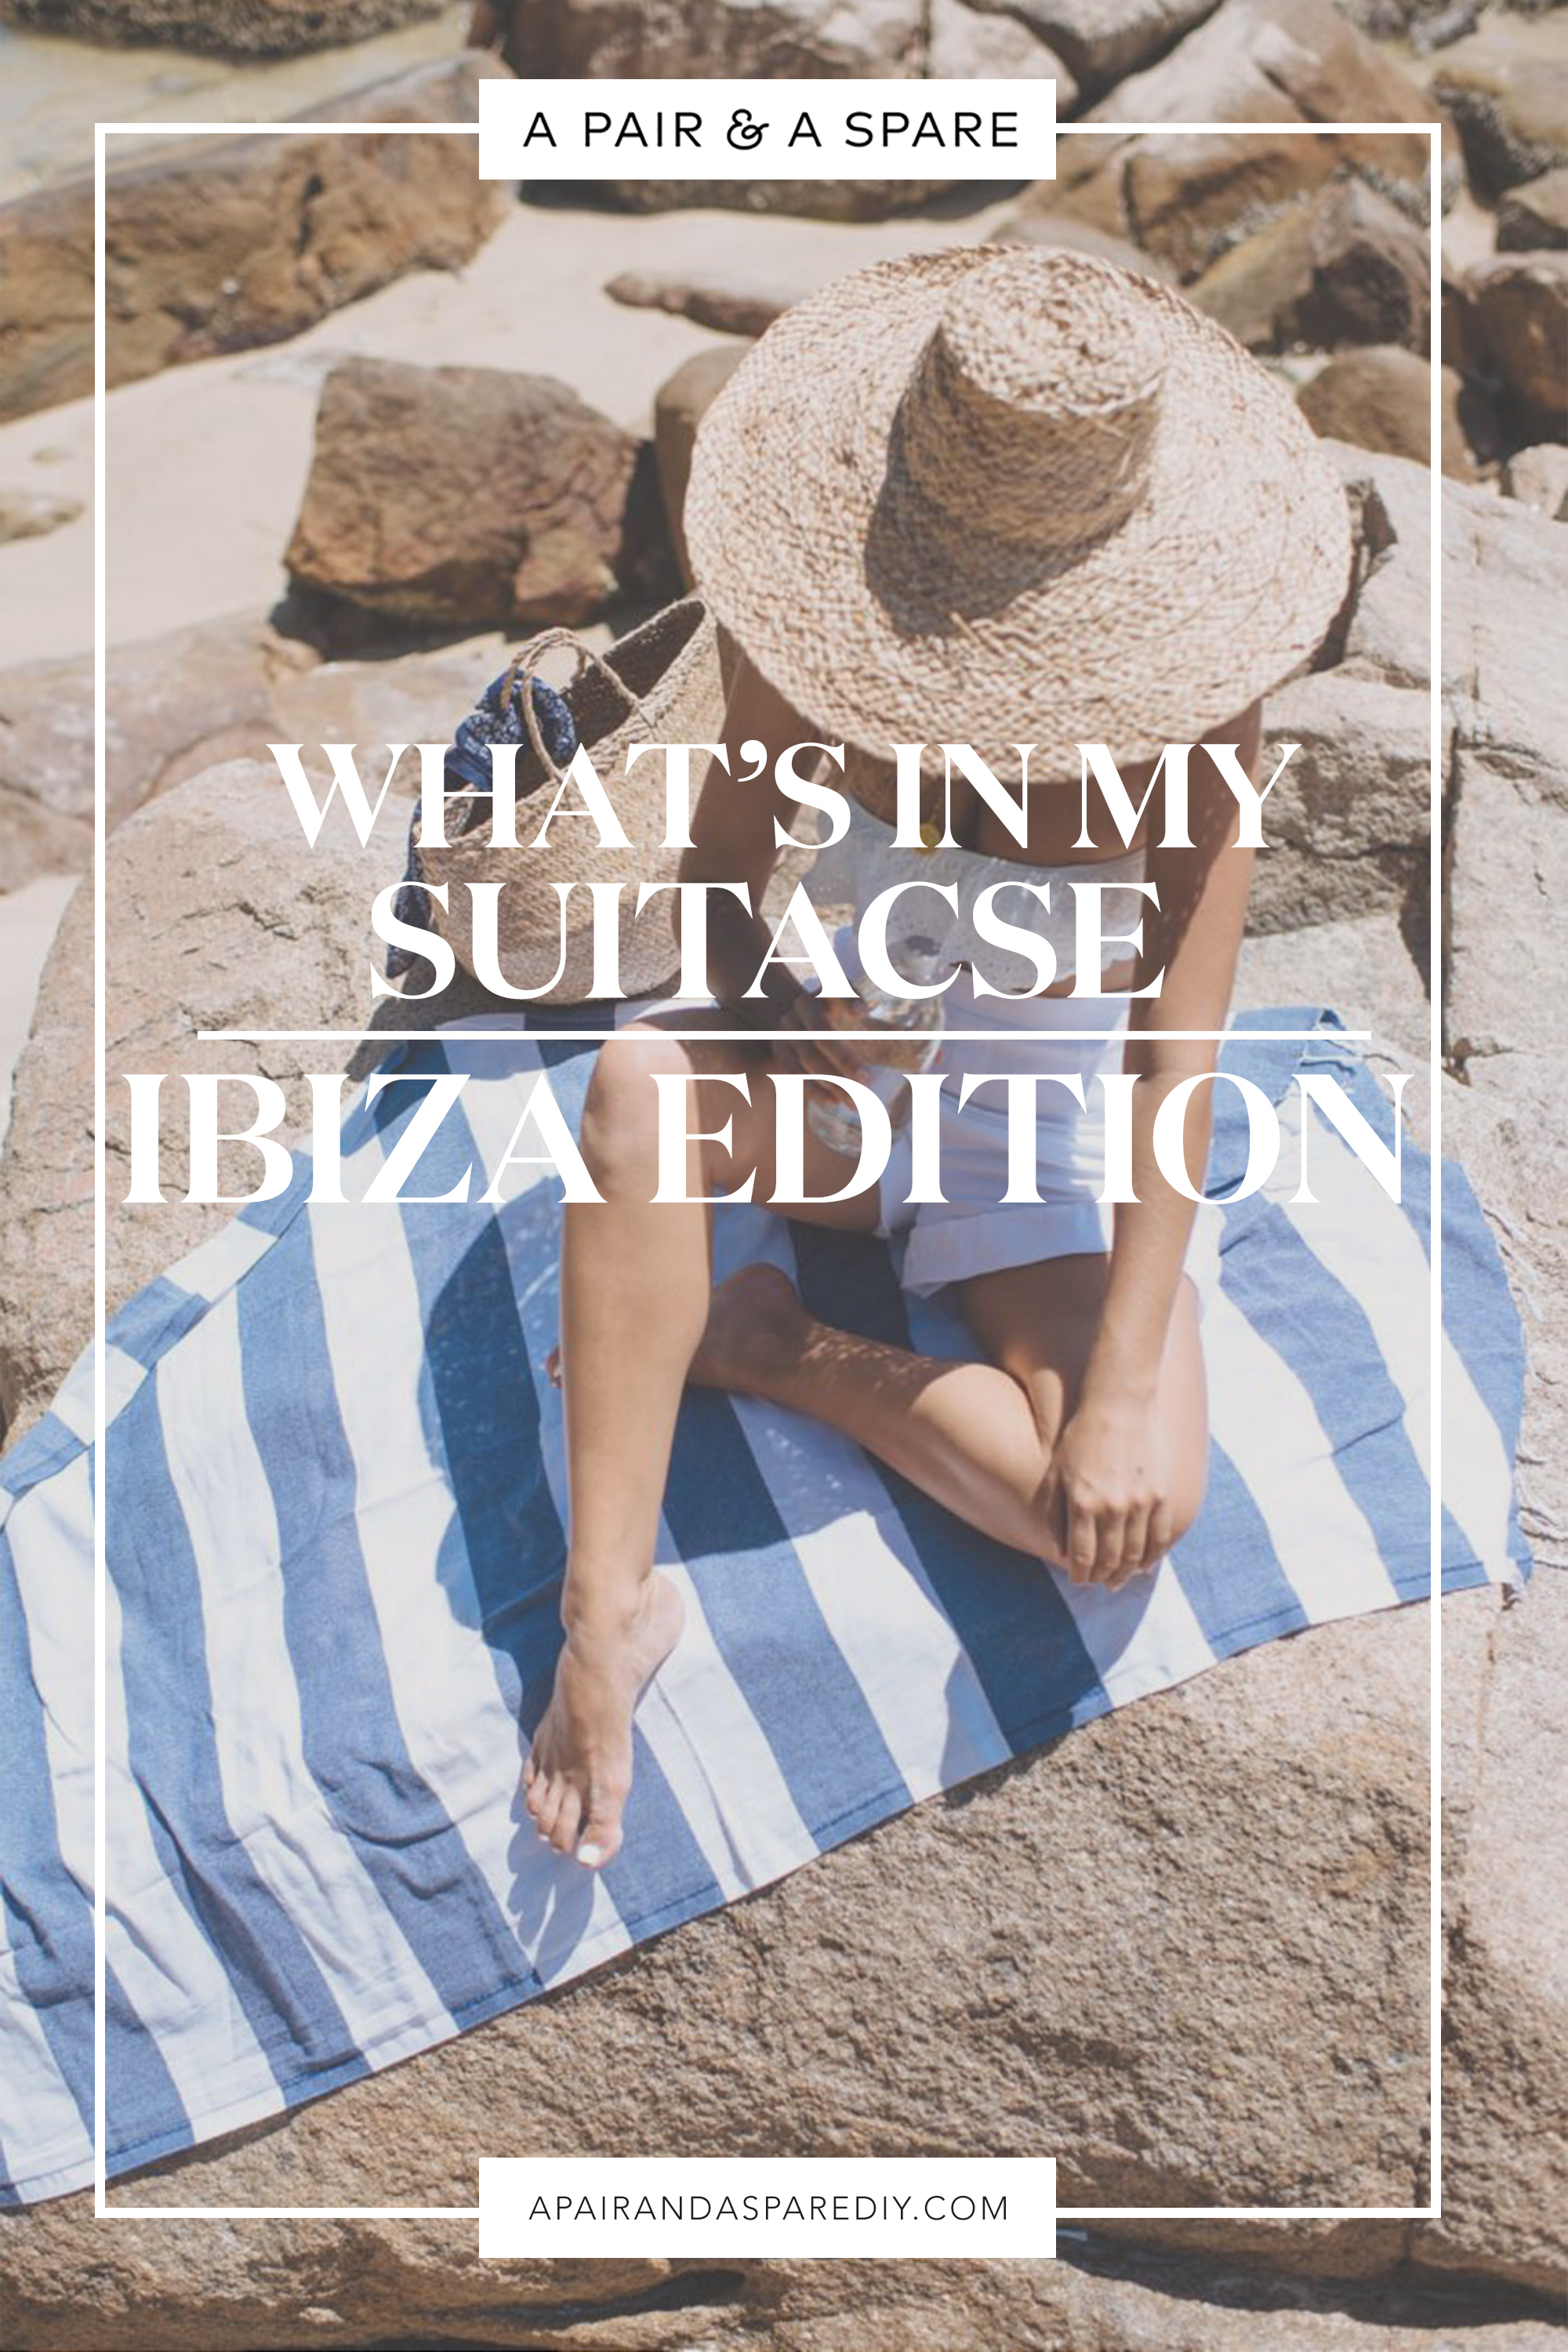 What's In my Suitcase: Ibiza Edition